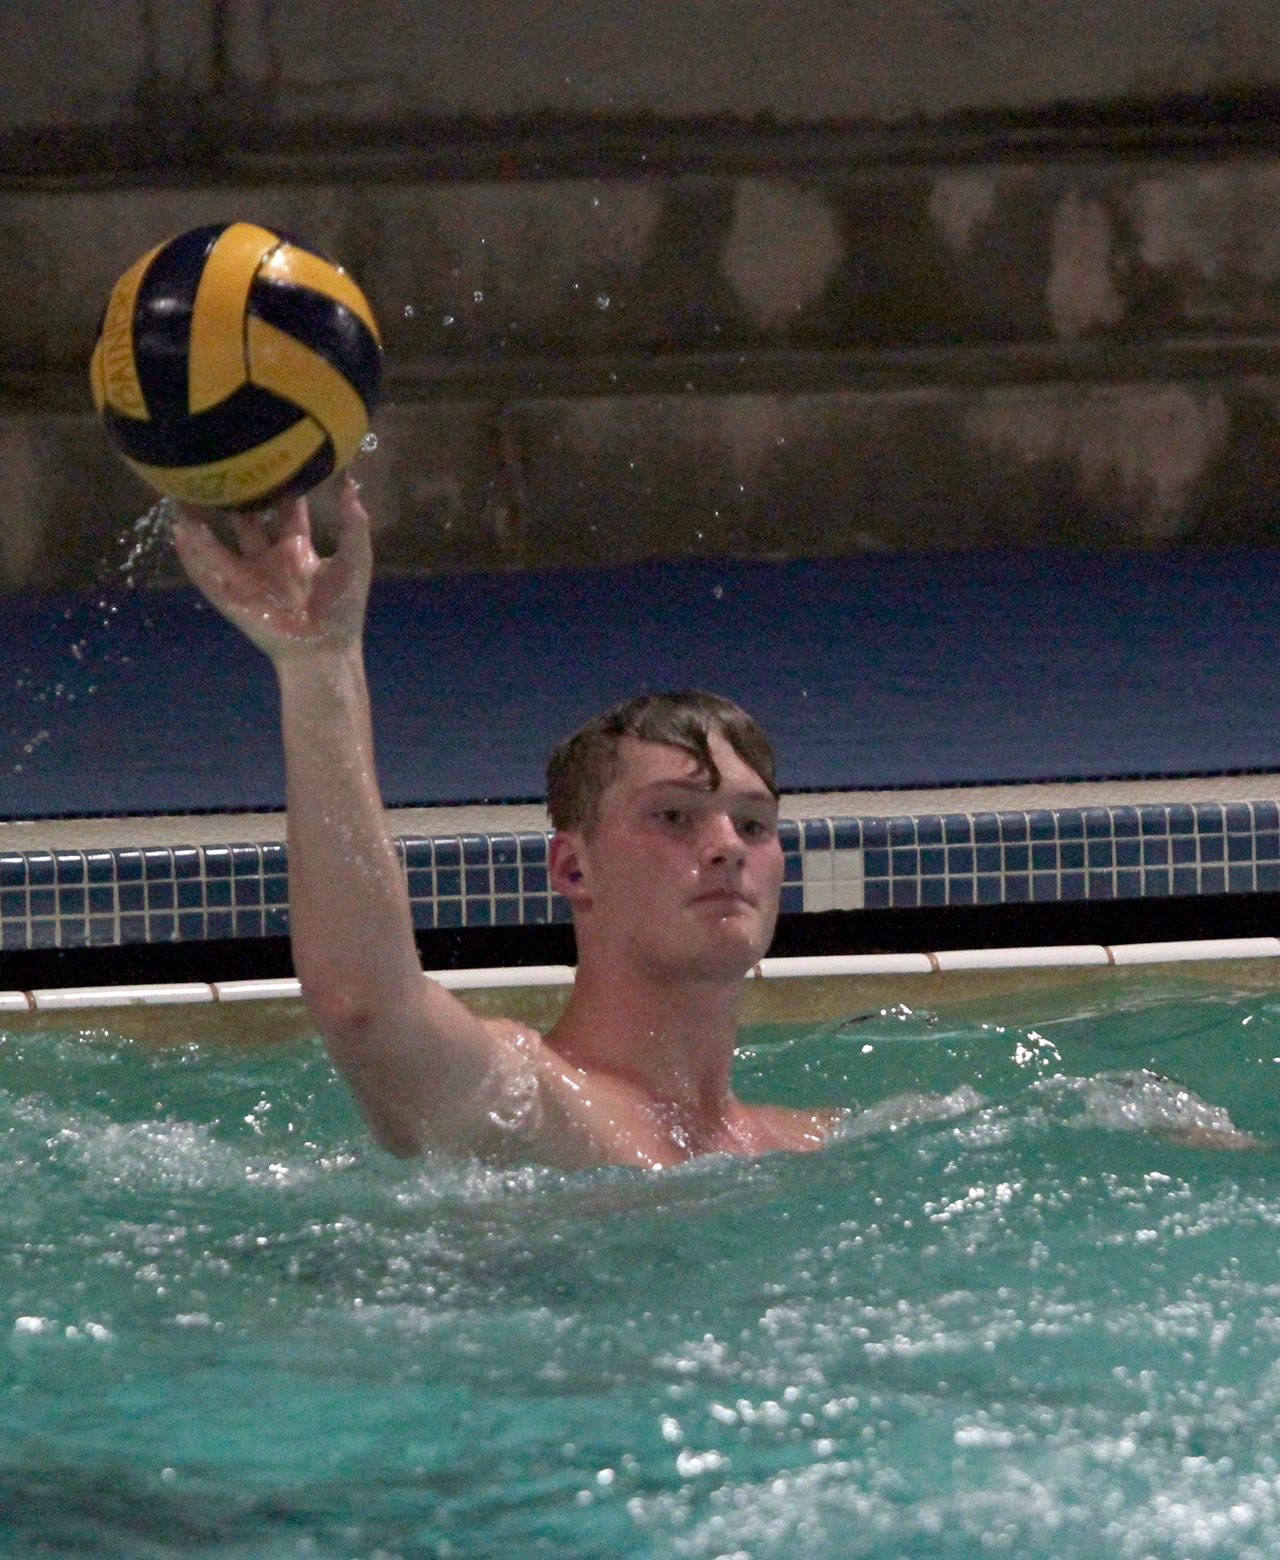 A splashy start: BHS boys get set to sweep water polo league | Photo gallery